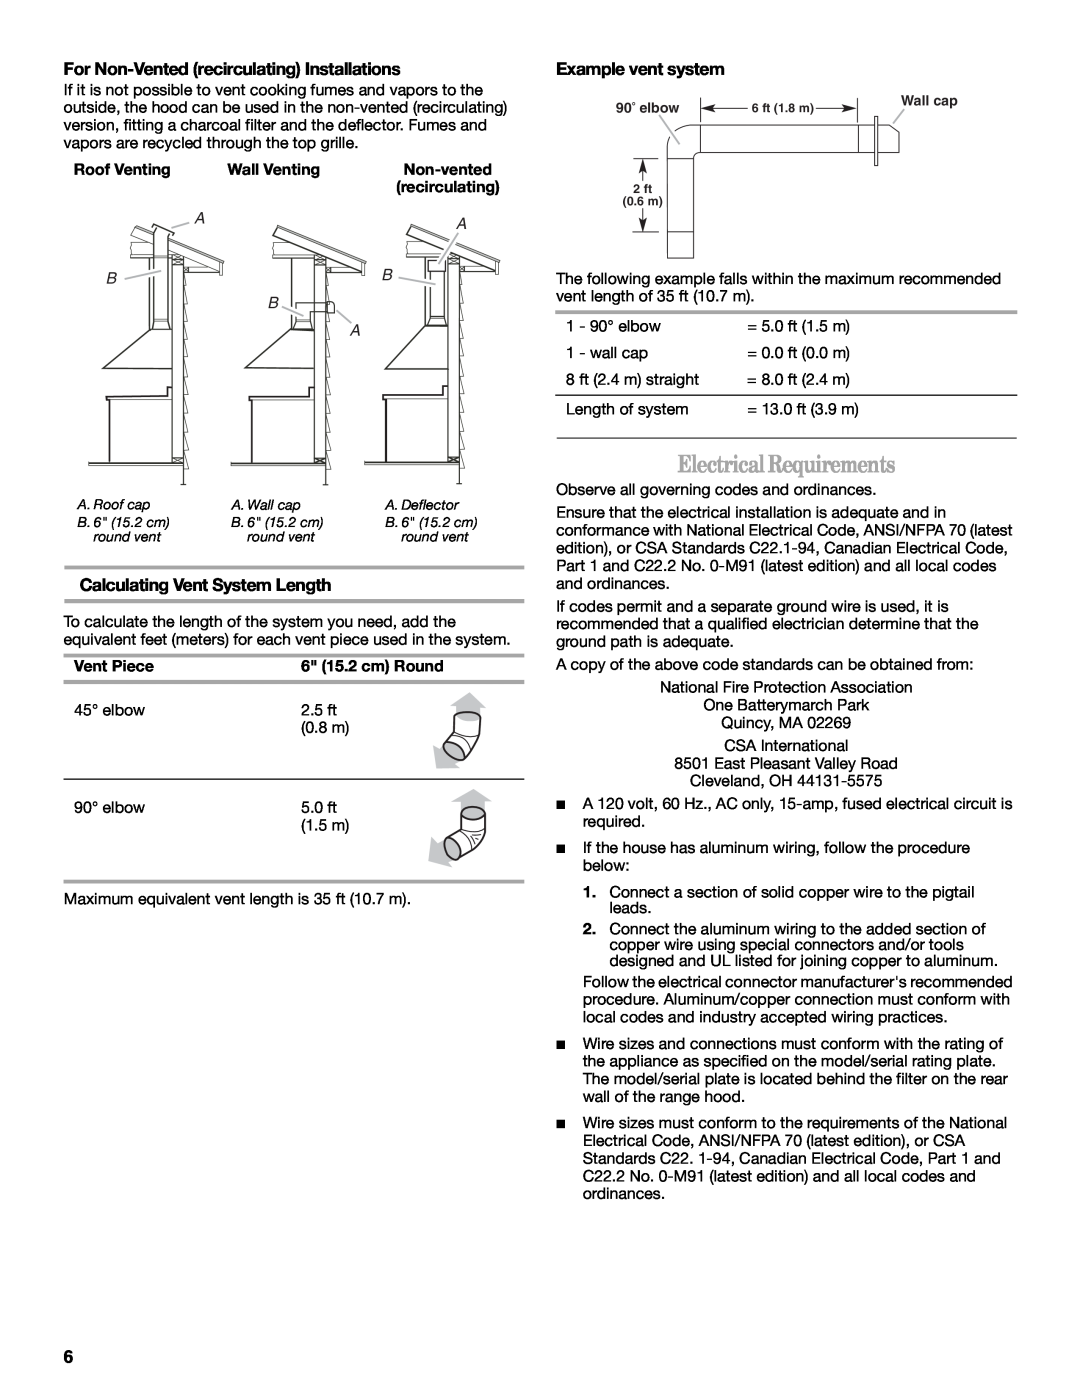 Whirlpool LI3Y3B Electrical Requirements, For Non-Ventedrecirculating Installations, Example vent system, Aa B B A 